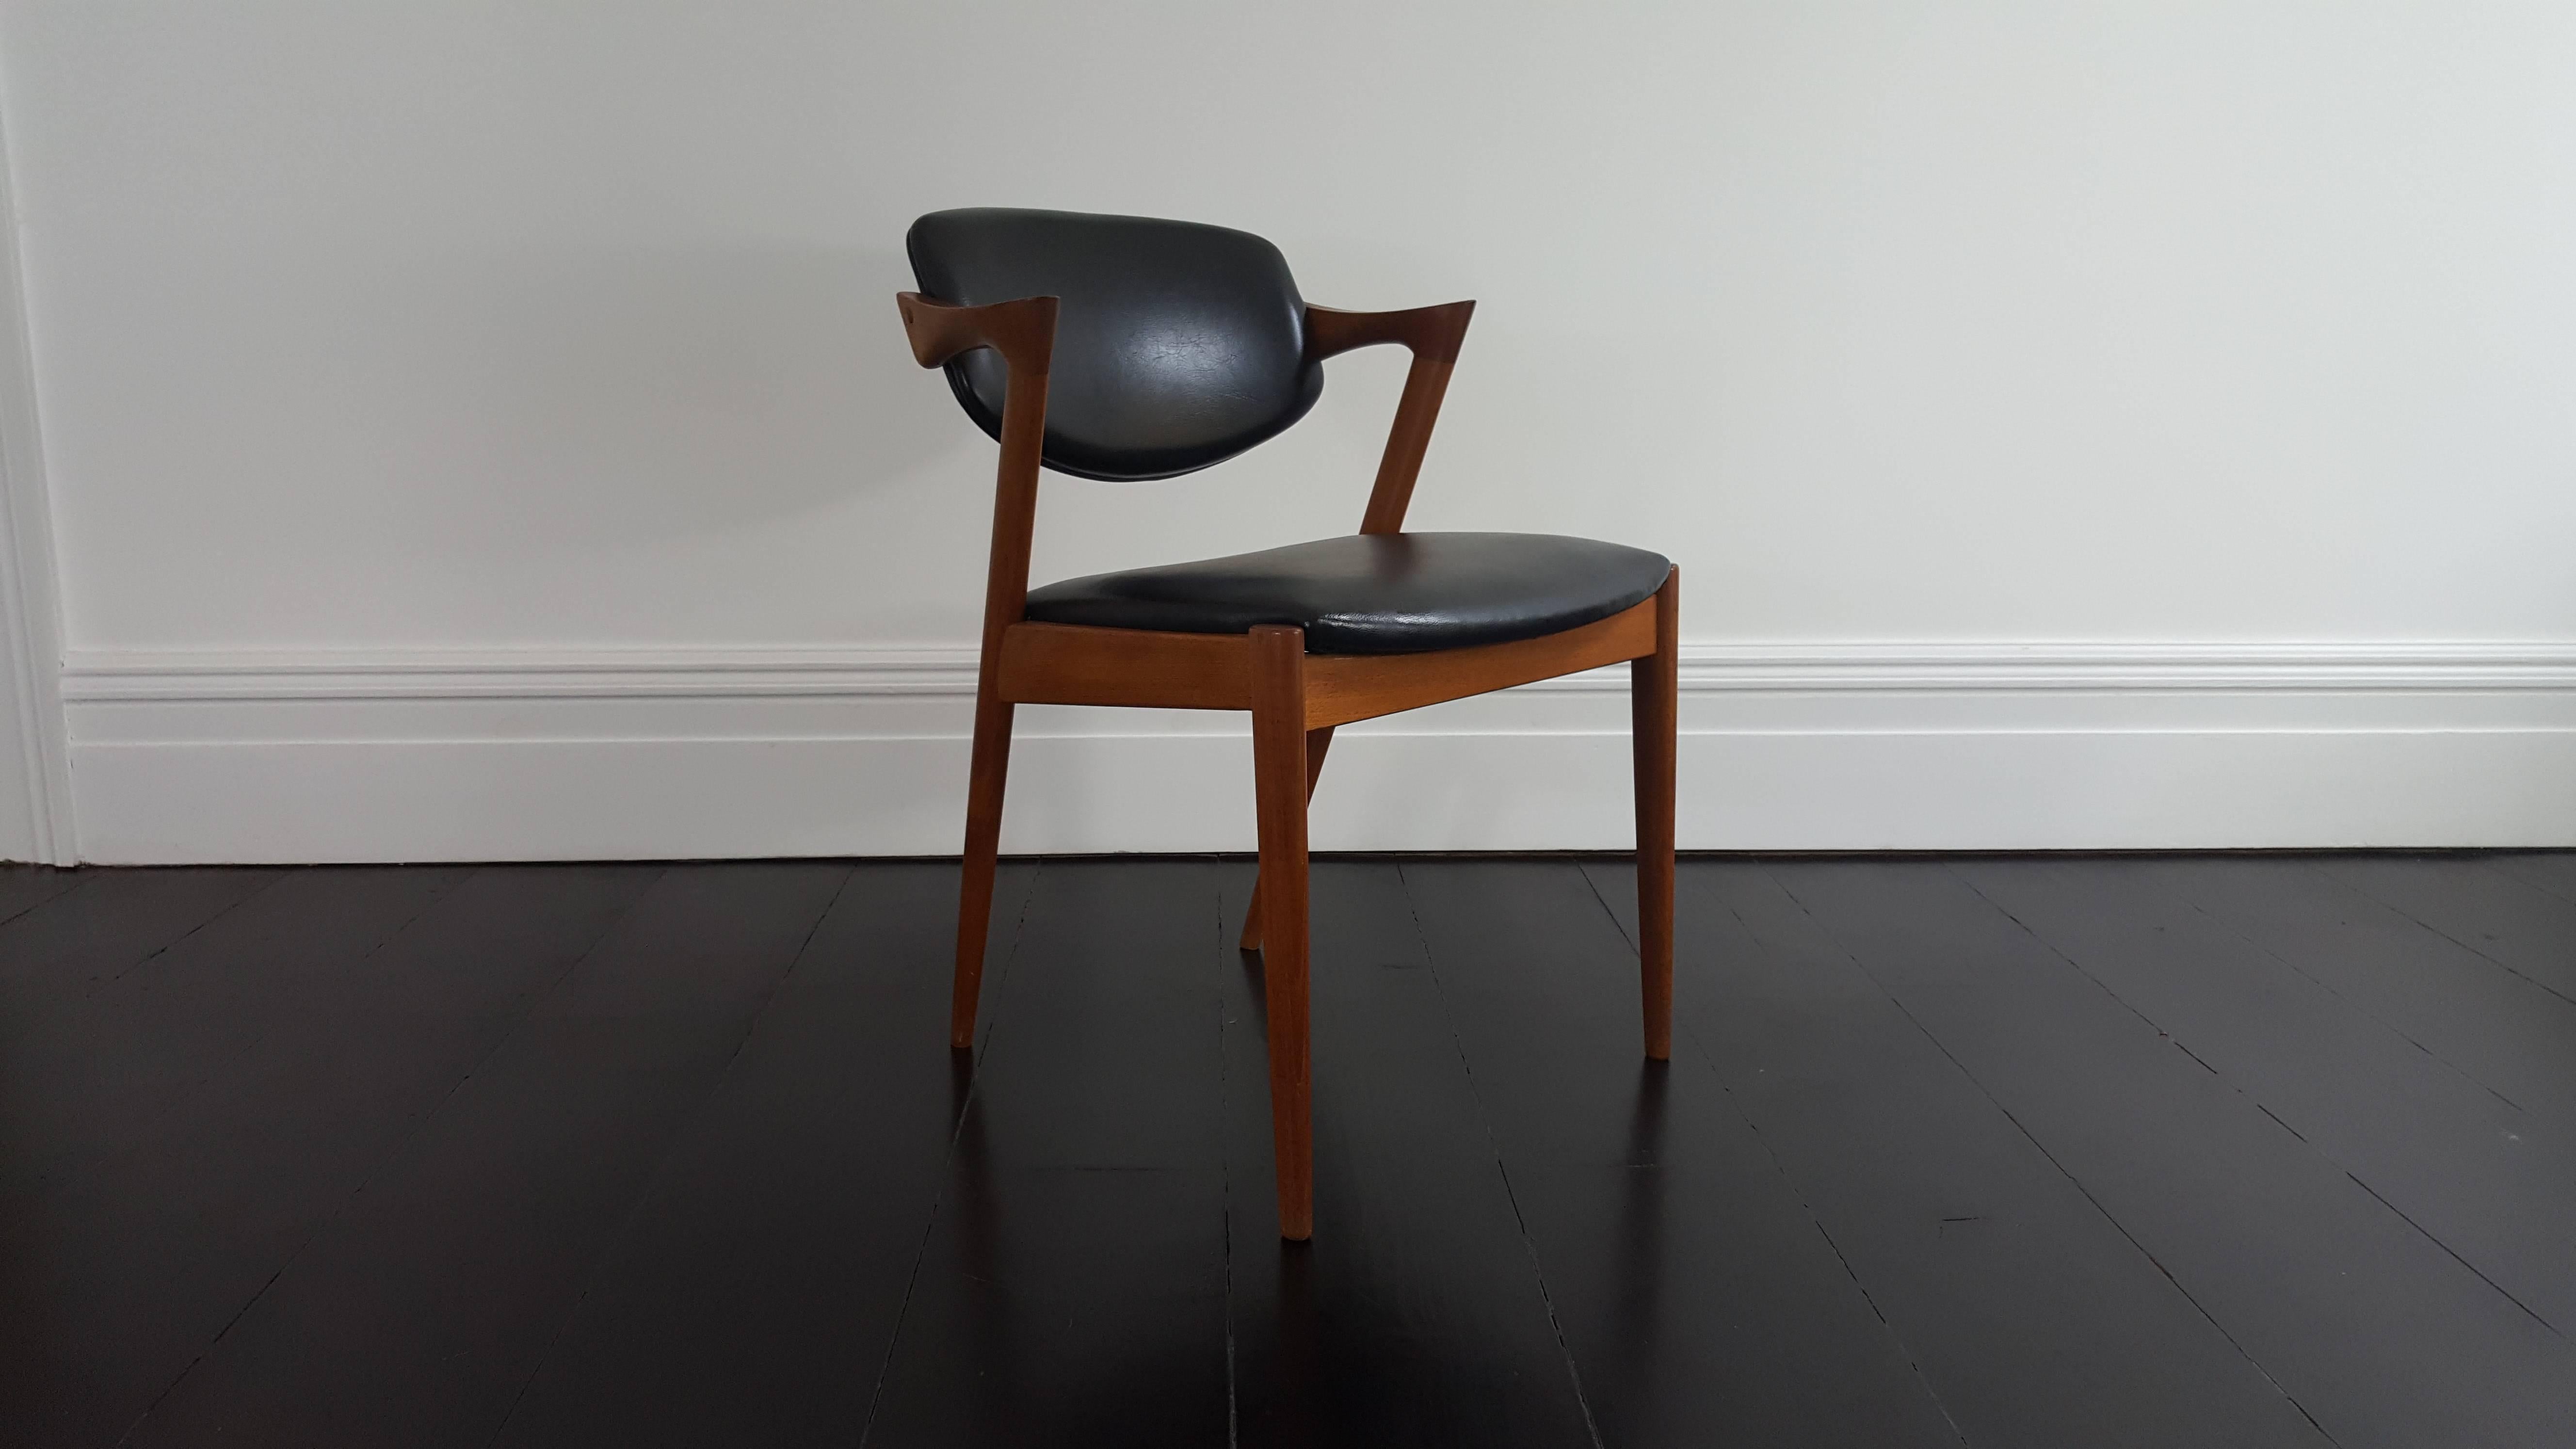 Amazing Kai Kristiansen Model 42 teak frame side chair for Schou Andersen 1960s, with original faux black leather upholstery.

